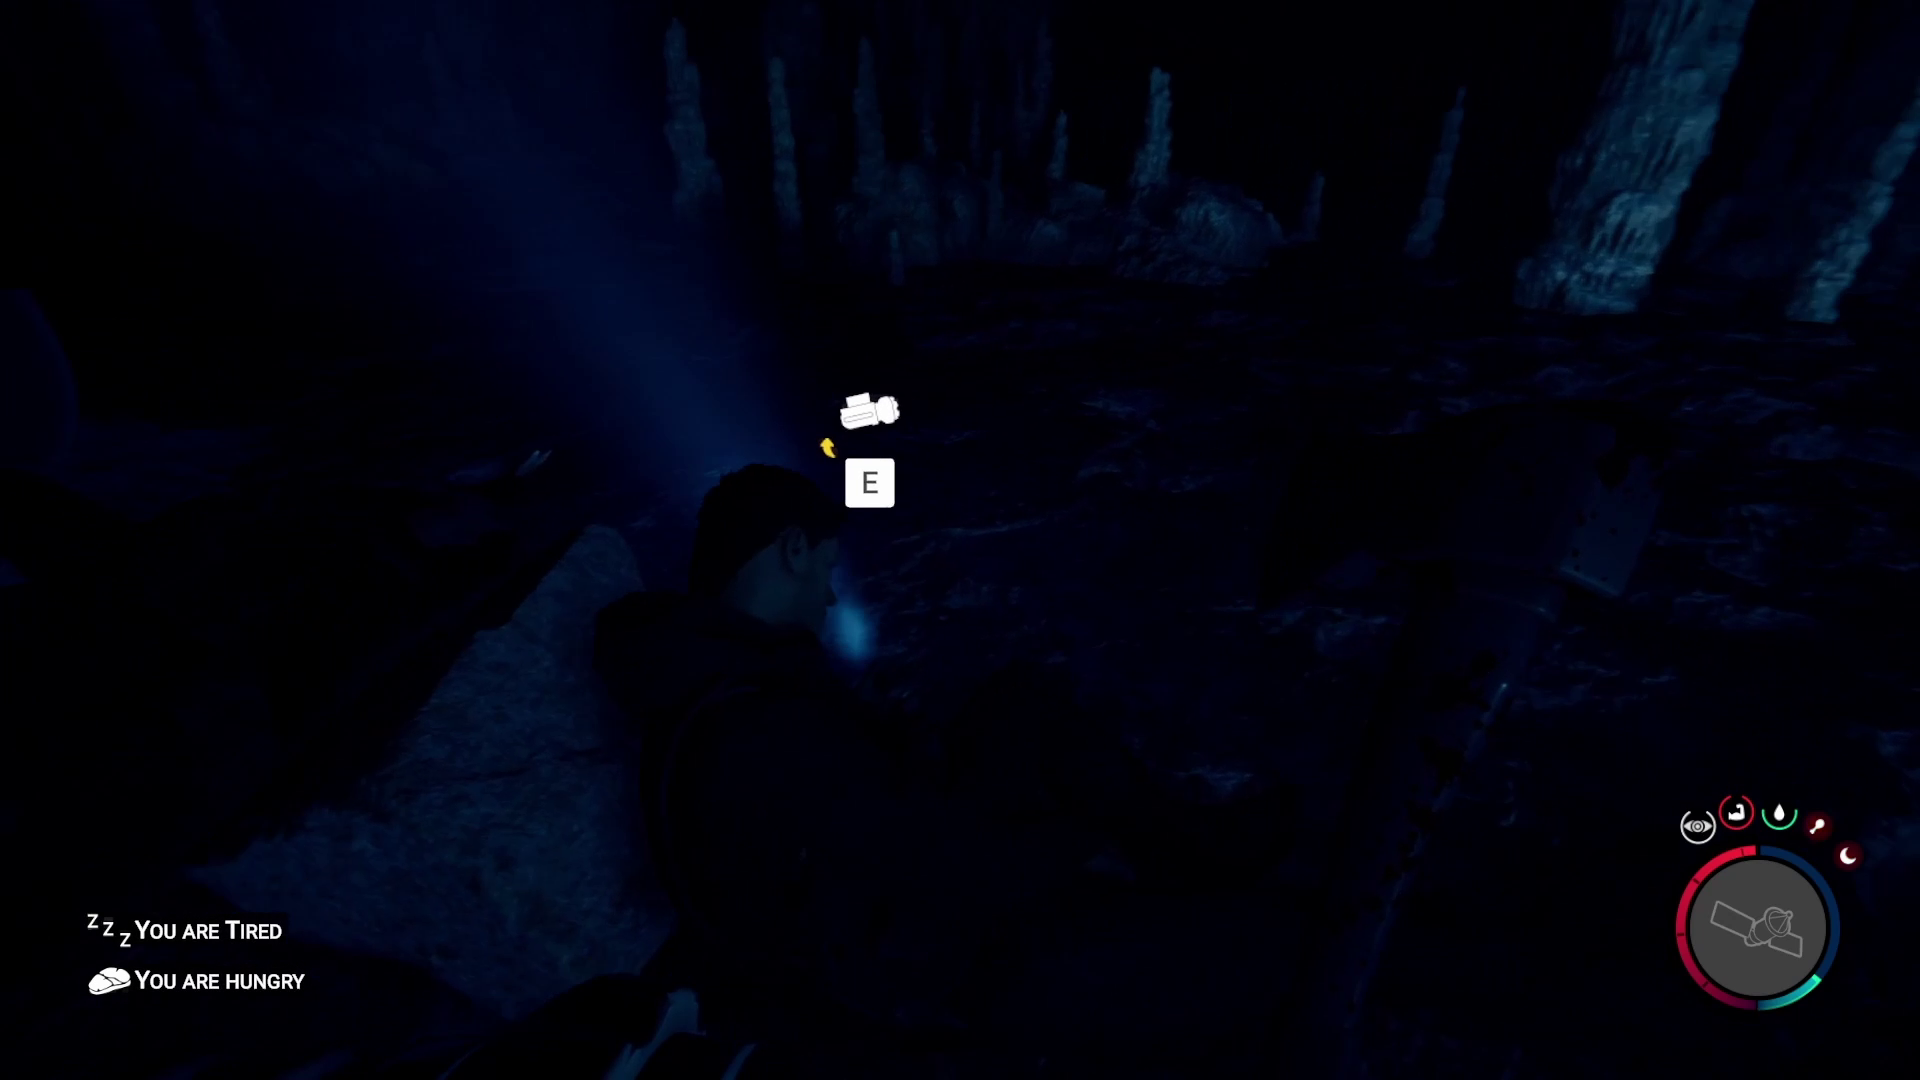 How to get the shovel in Sons of the Forest